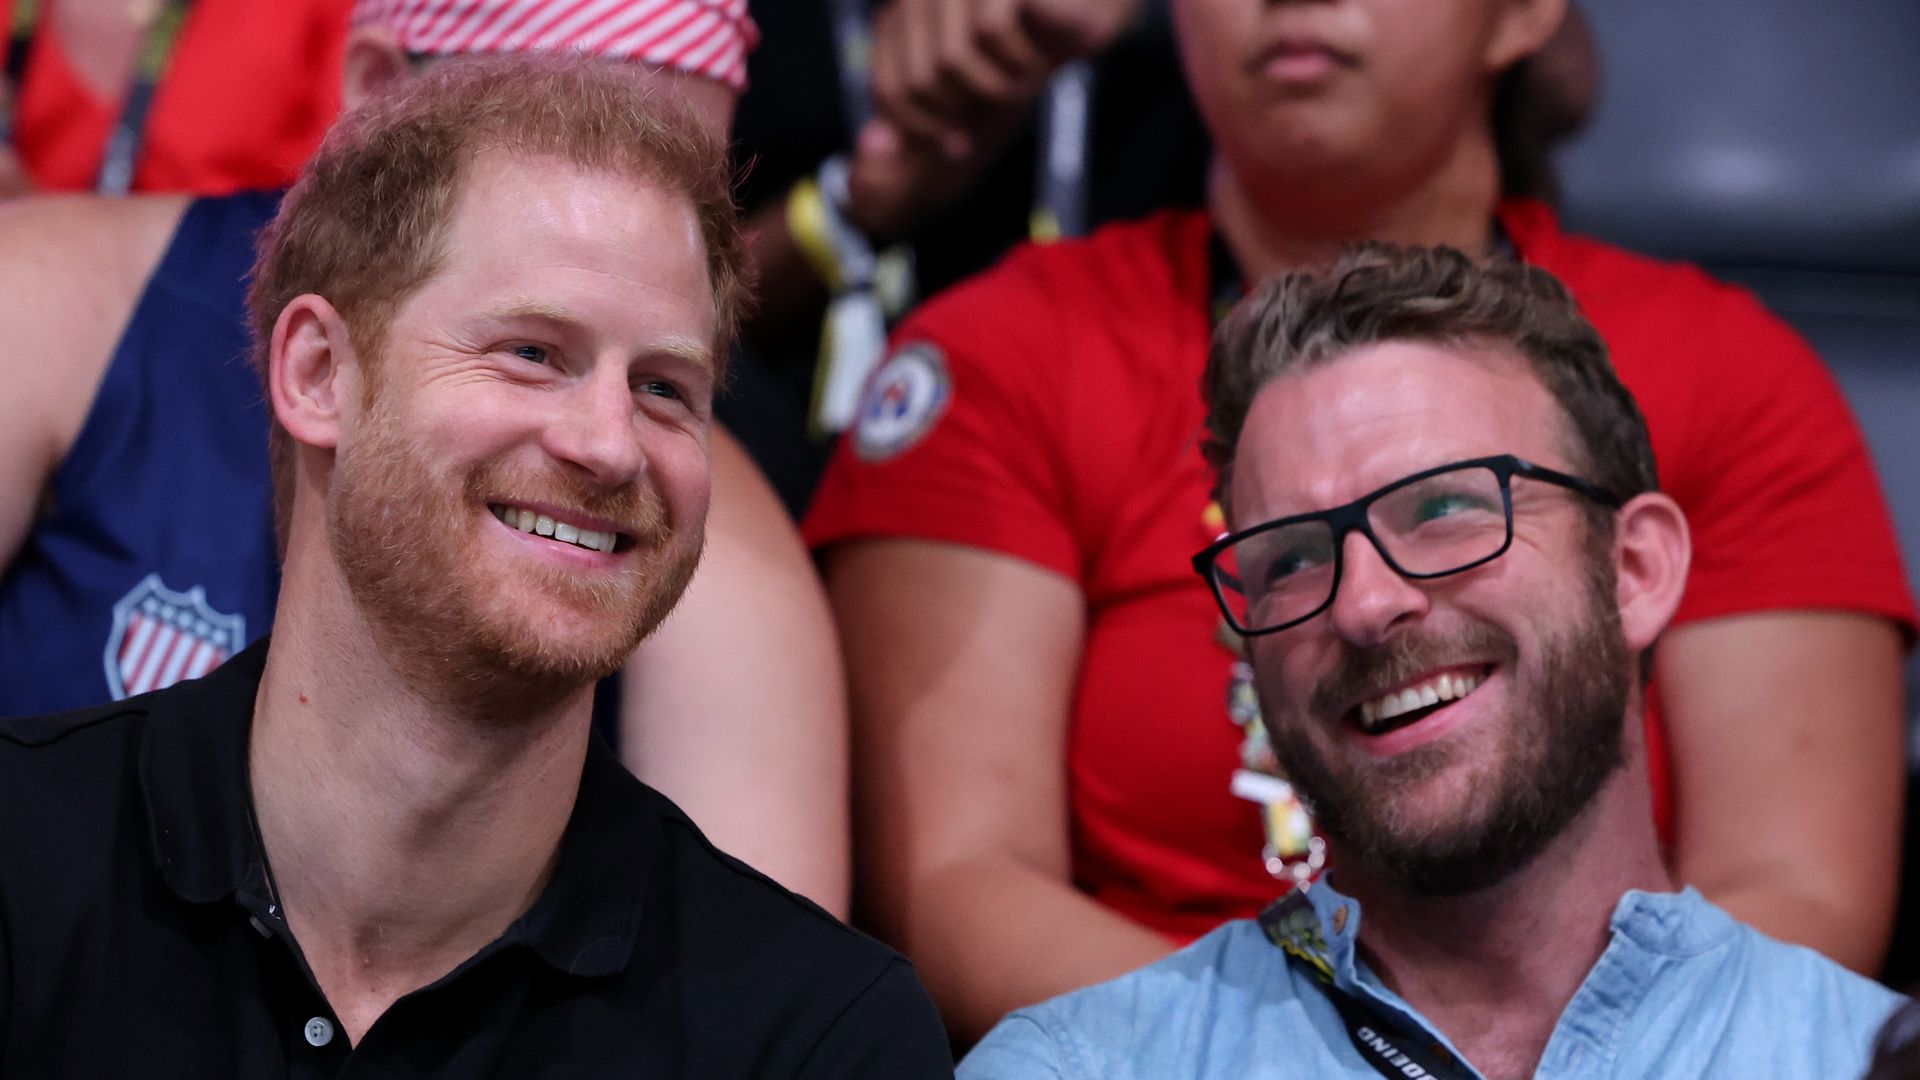 Prince Harry and JJ Chalmers laughing 